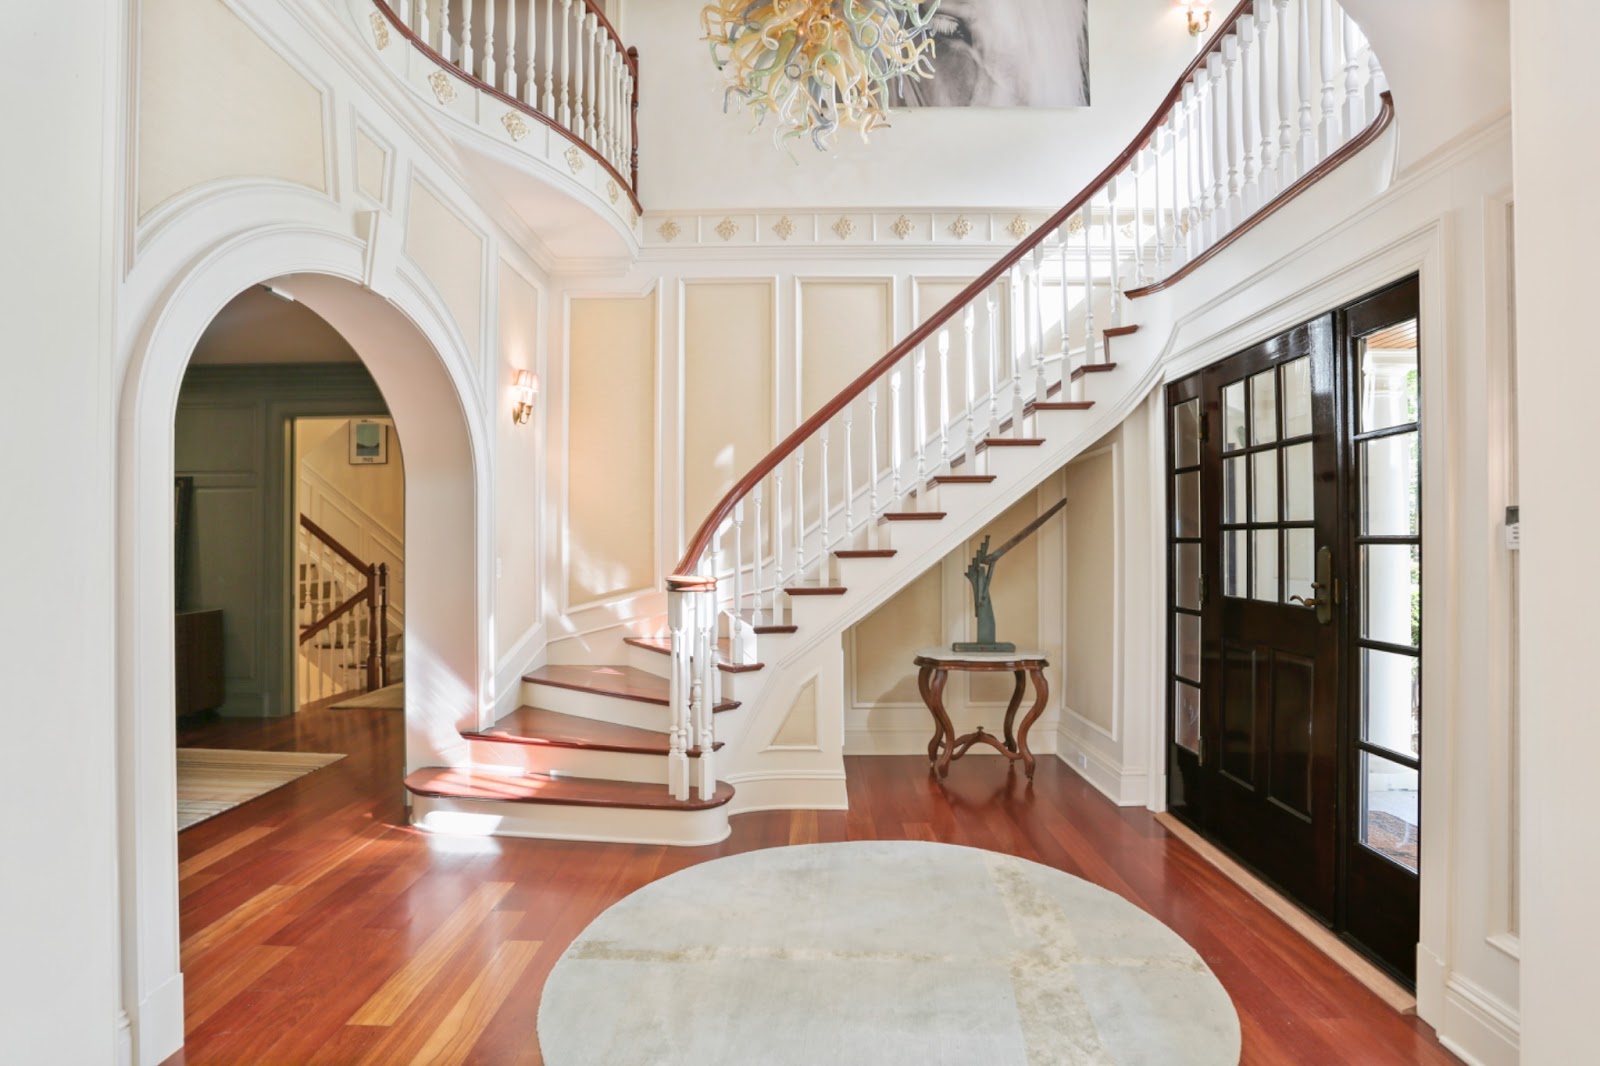 A grand two-story foyer entryway features a sweeping staircase with table and sculpture in alcove beneath the stairs, Murano-style glass sculpture chandelier and large mural art above the stairs.